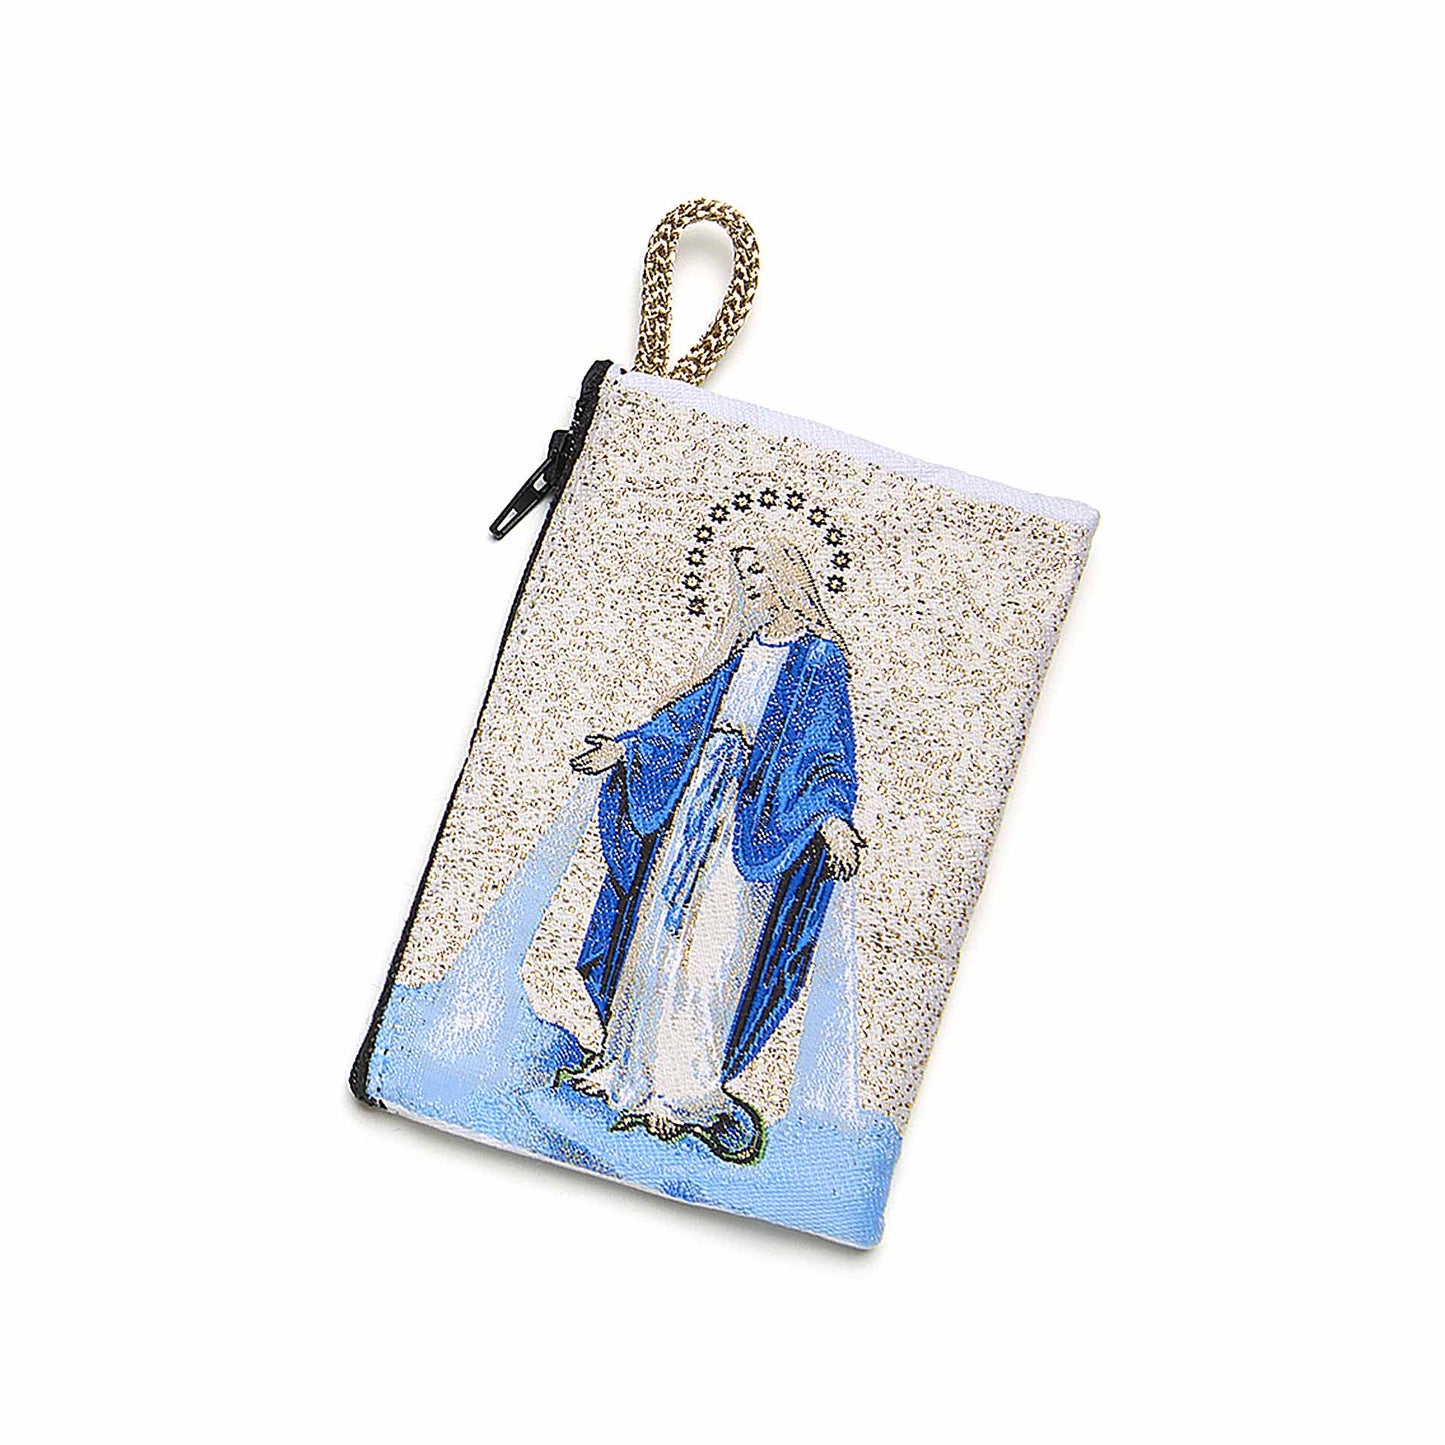 Fabric Purse with Image of the Miraculous Virgin 4x3 inches